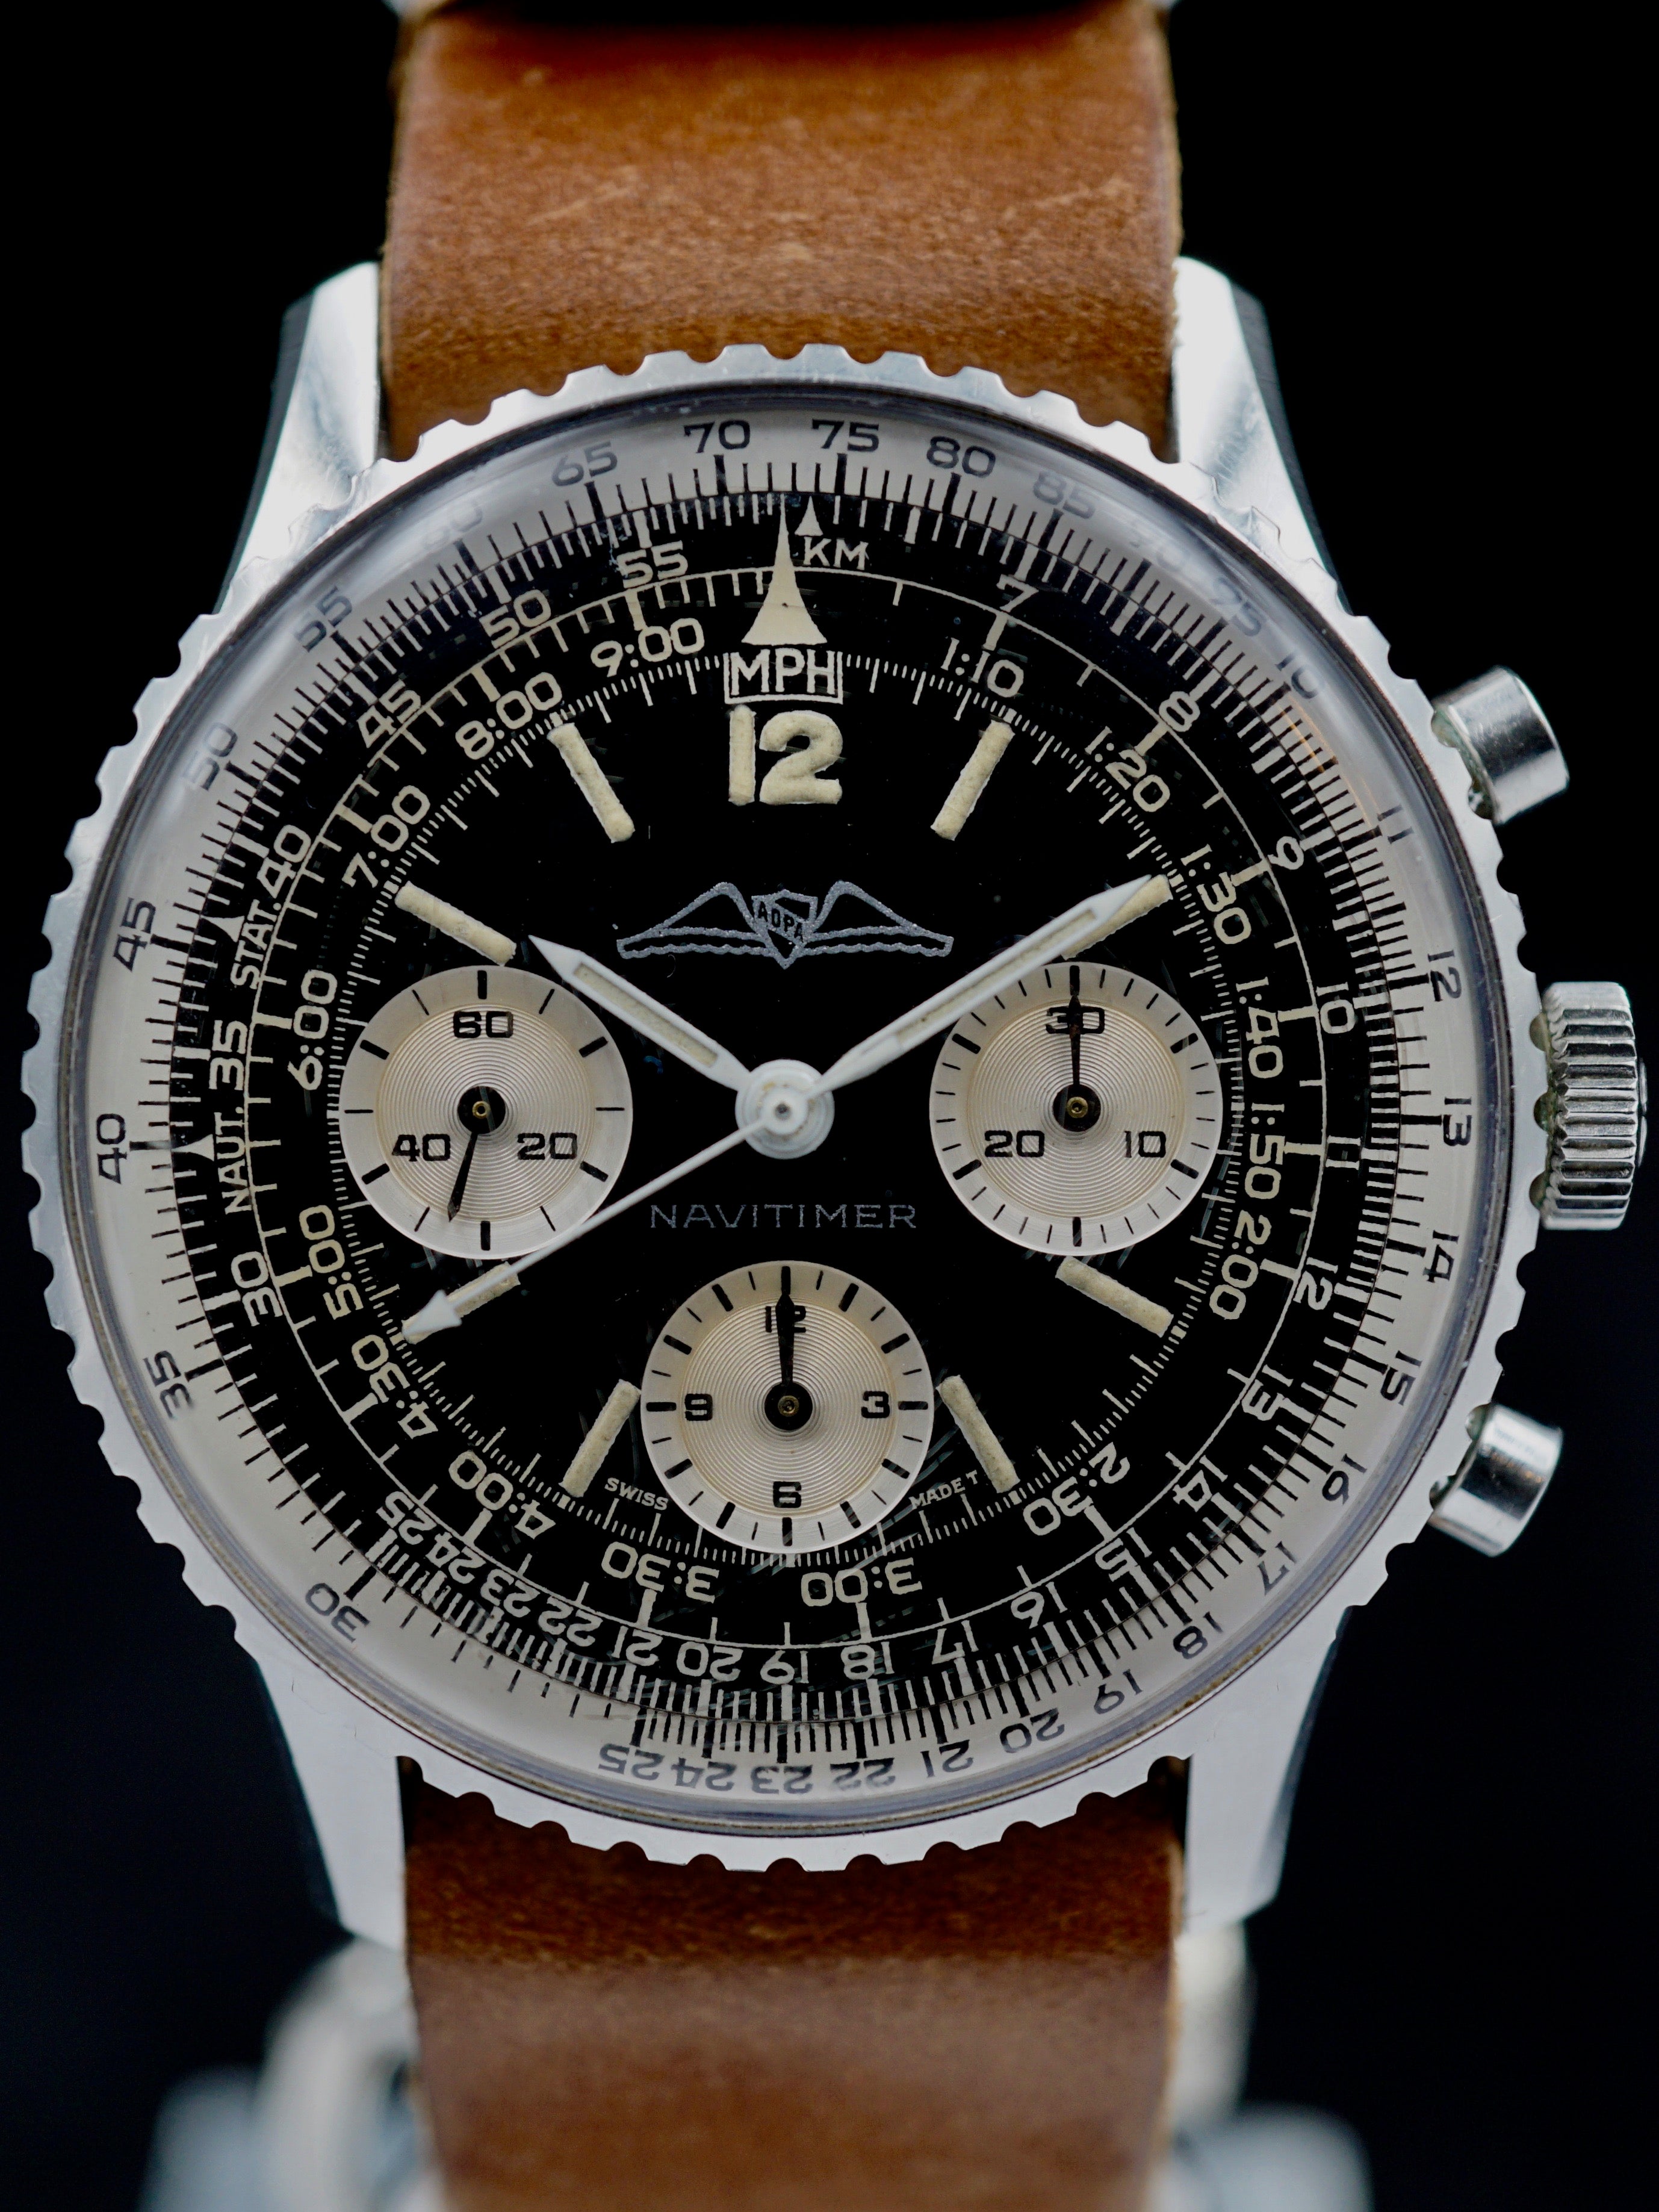 1966 Breitling Navitimer Ref. 806 AOPA Gilt Dial W/ Wakkman Box and Pamphlet